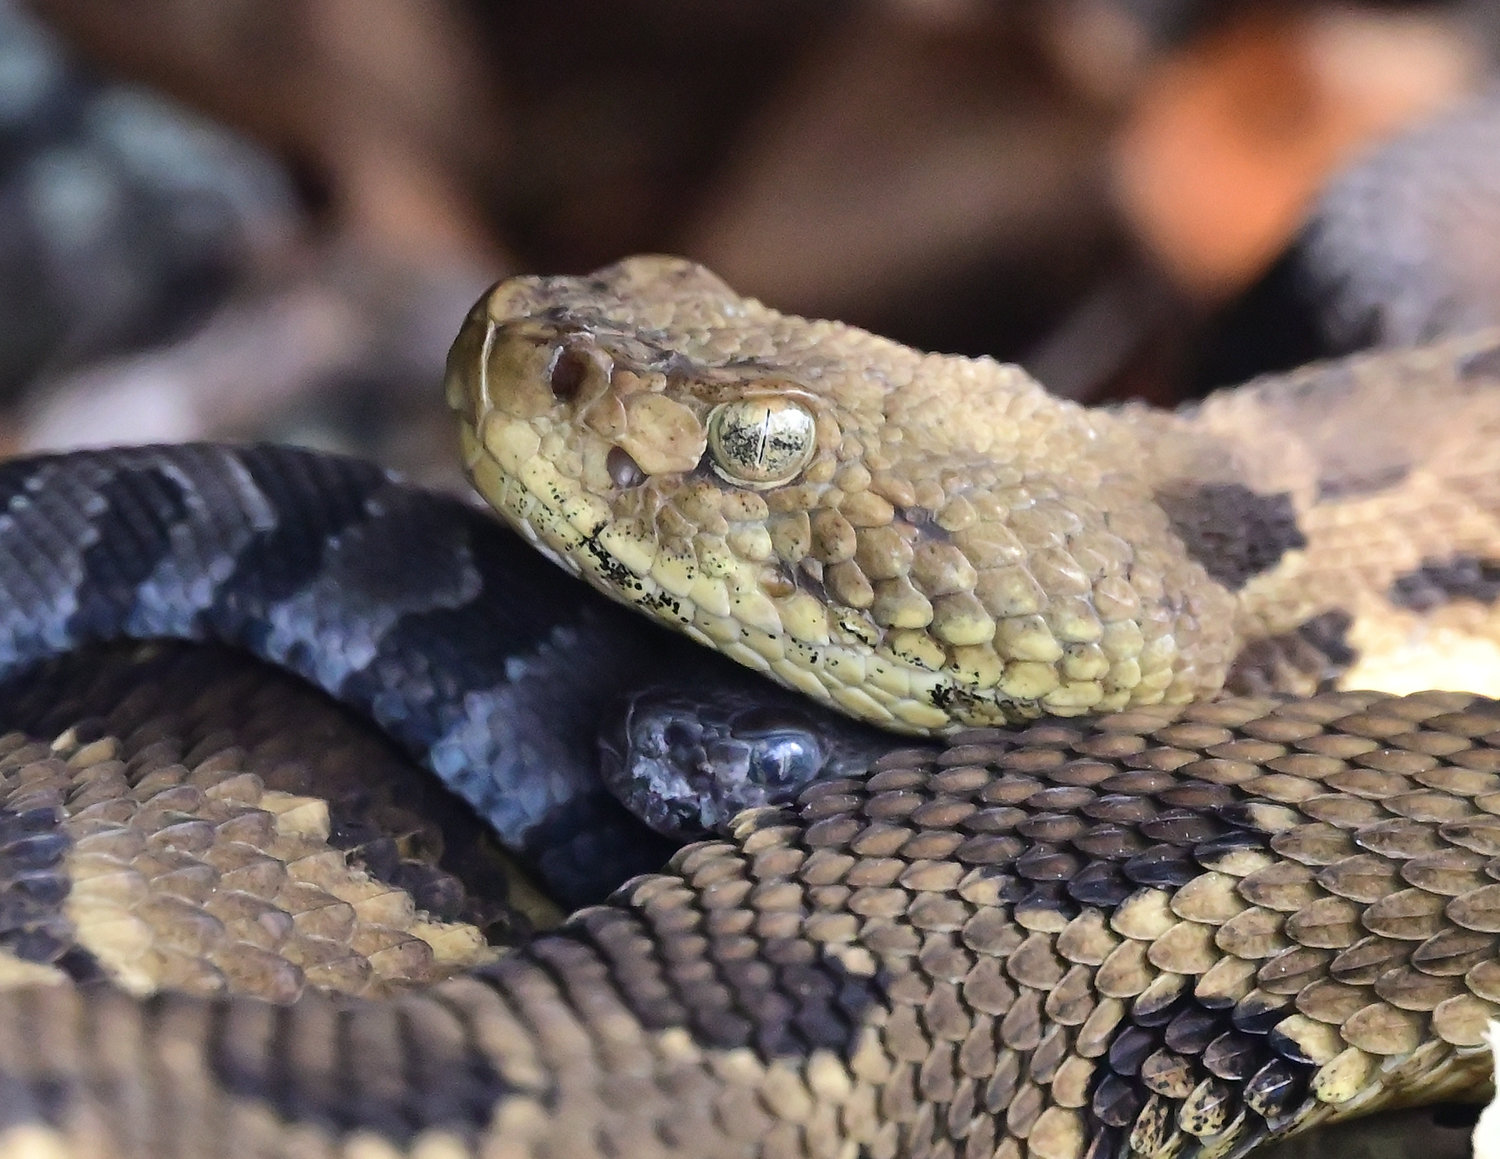 A female yellow phase timber rattlesnake is resting with another adult female and at least five other neonates. One of the neonates, about a foot long at birth, is resting just under the adult’s chin. Neonates appear gray with markings without too much coloration difference between the young.